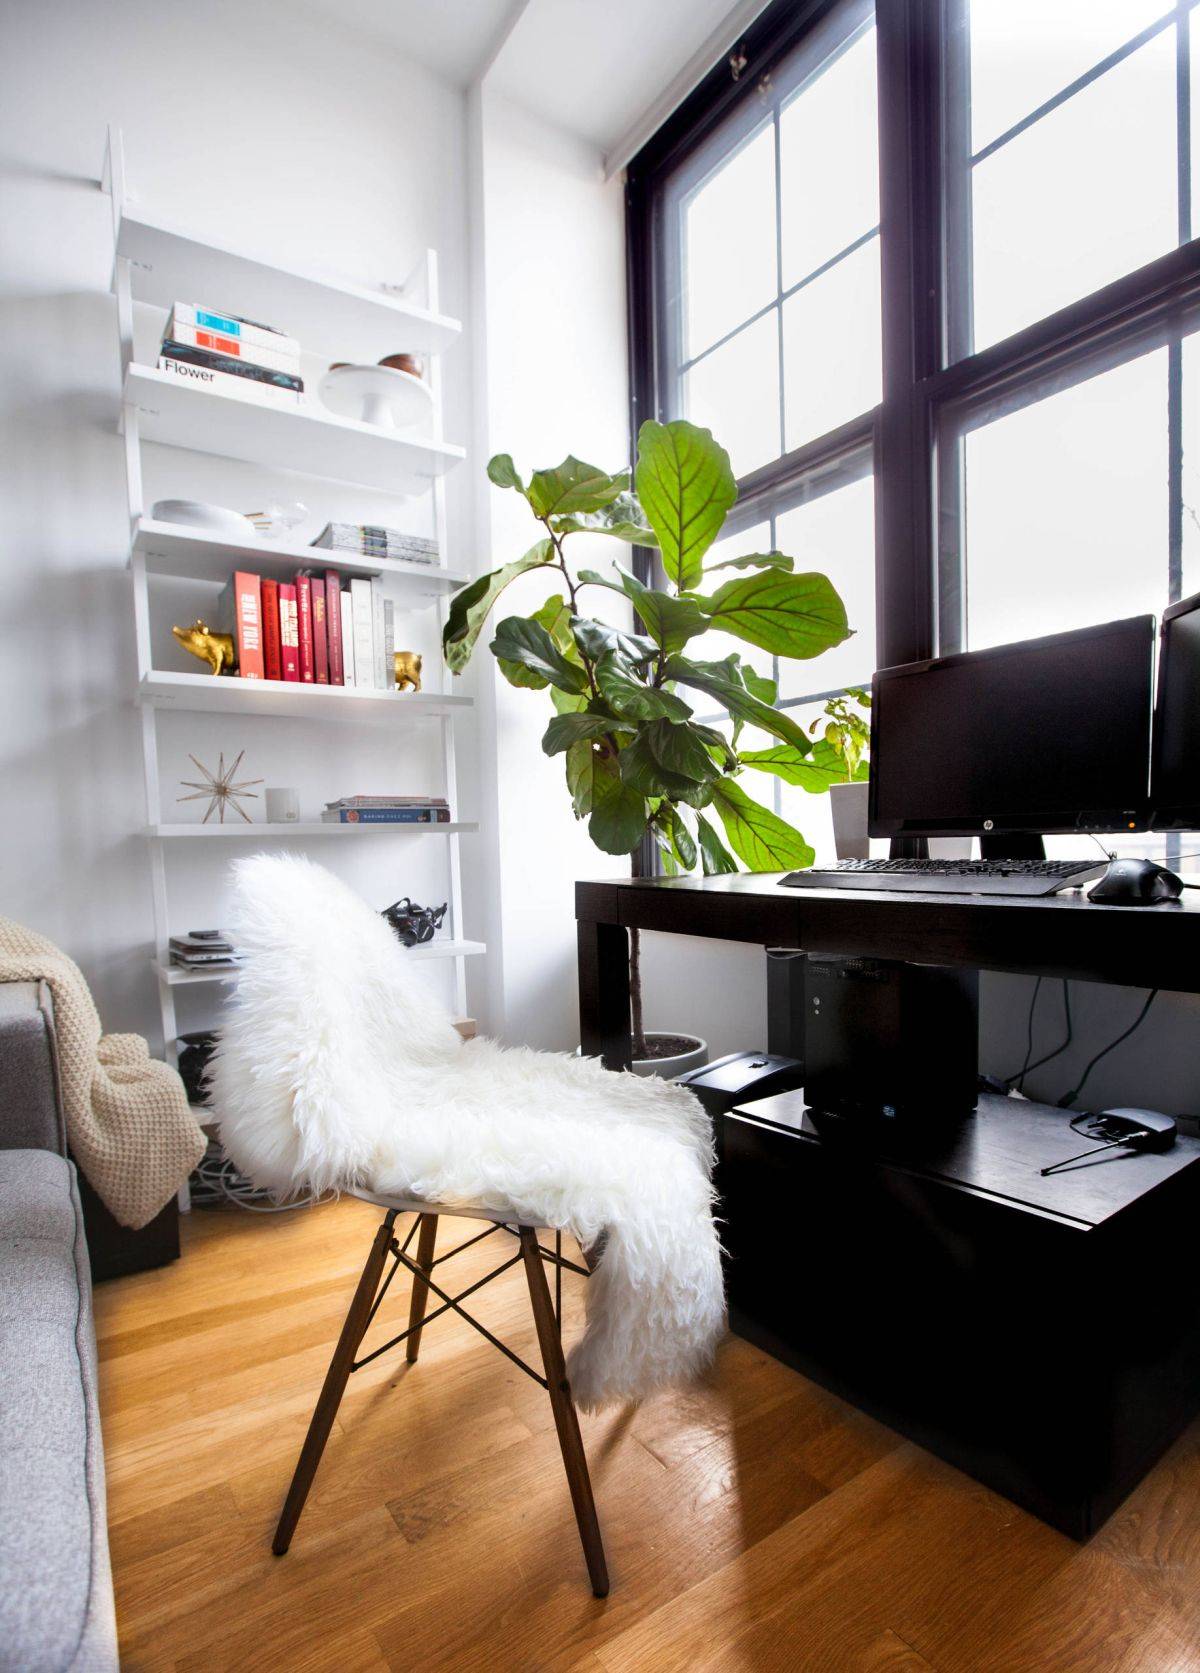 Add a bit of greenery and bring some natural light into the home office this year